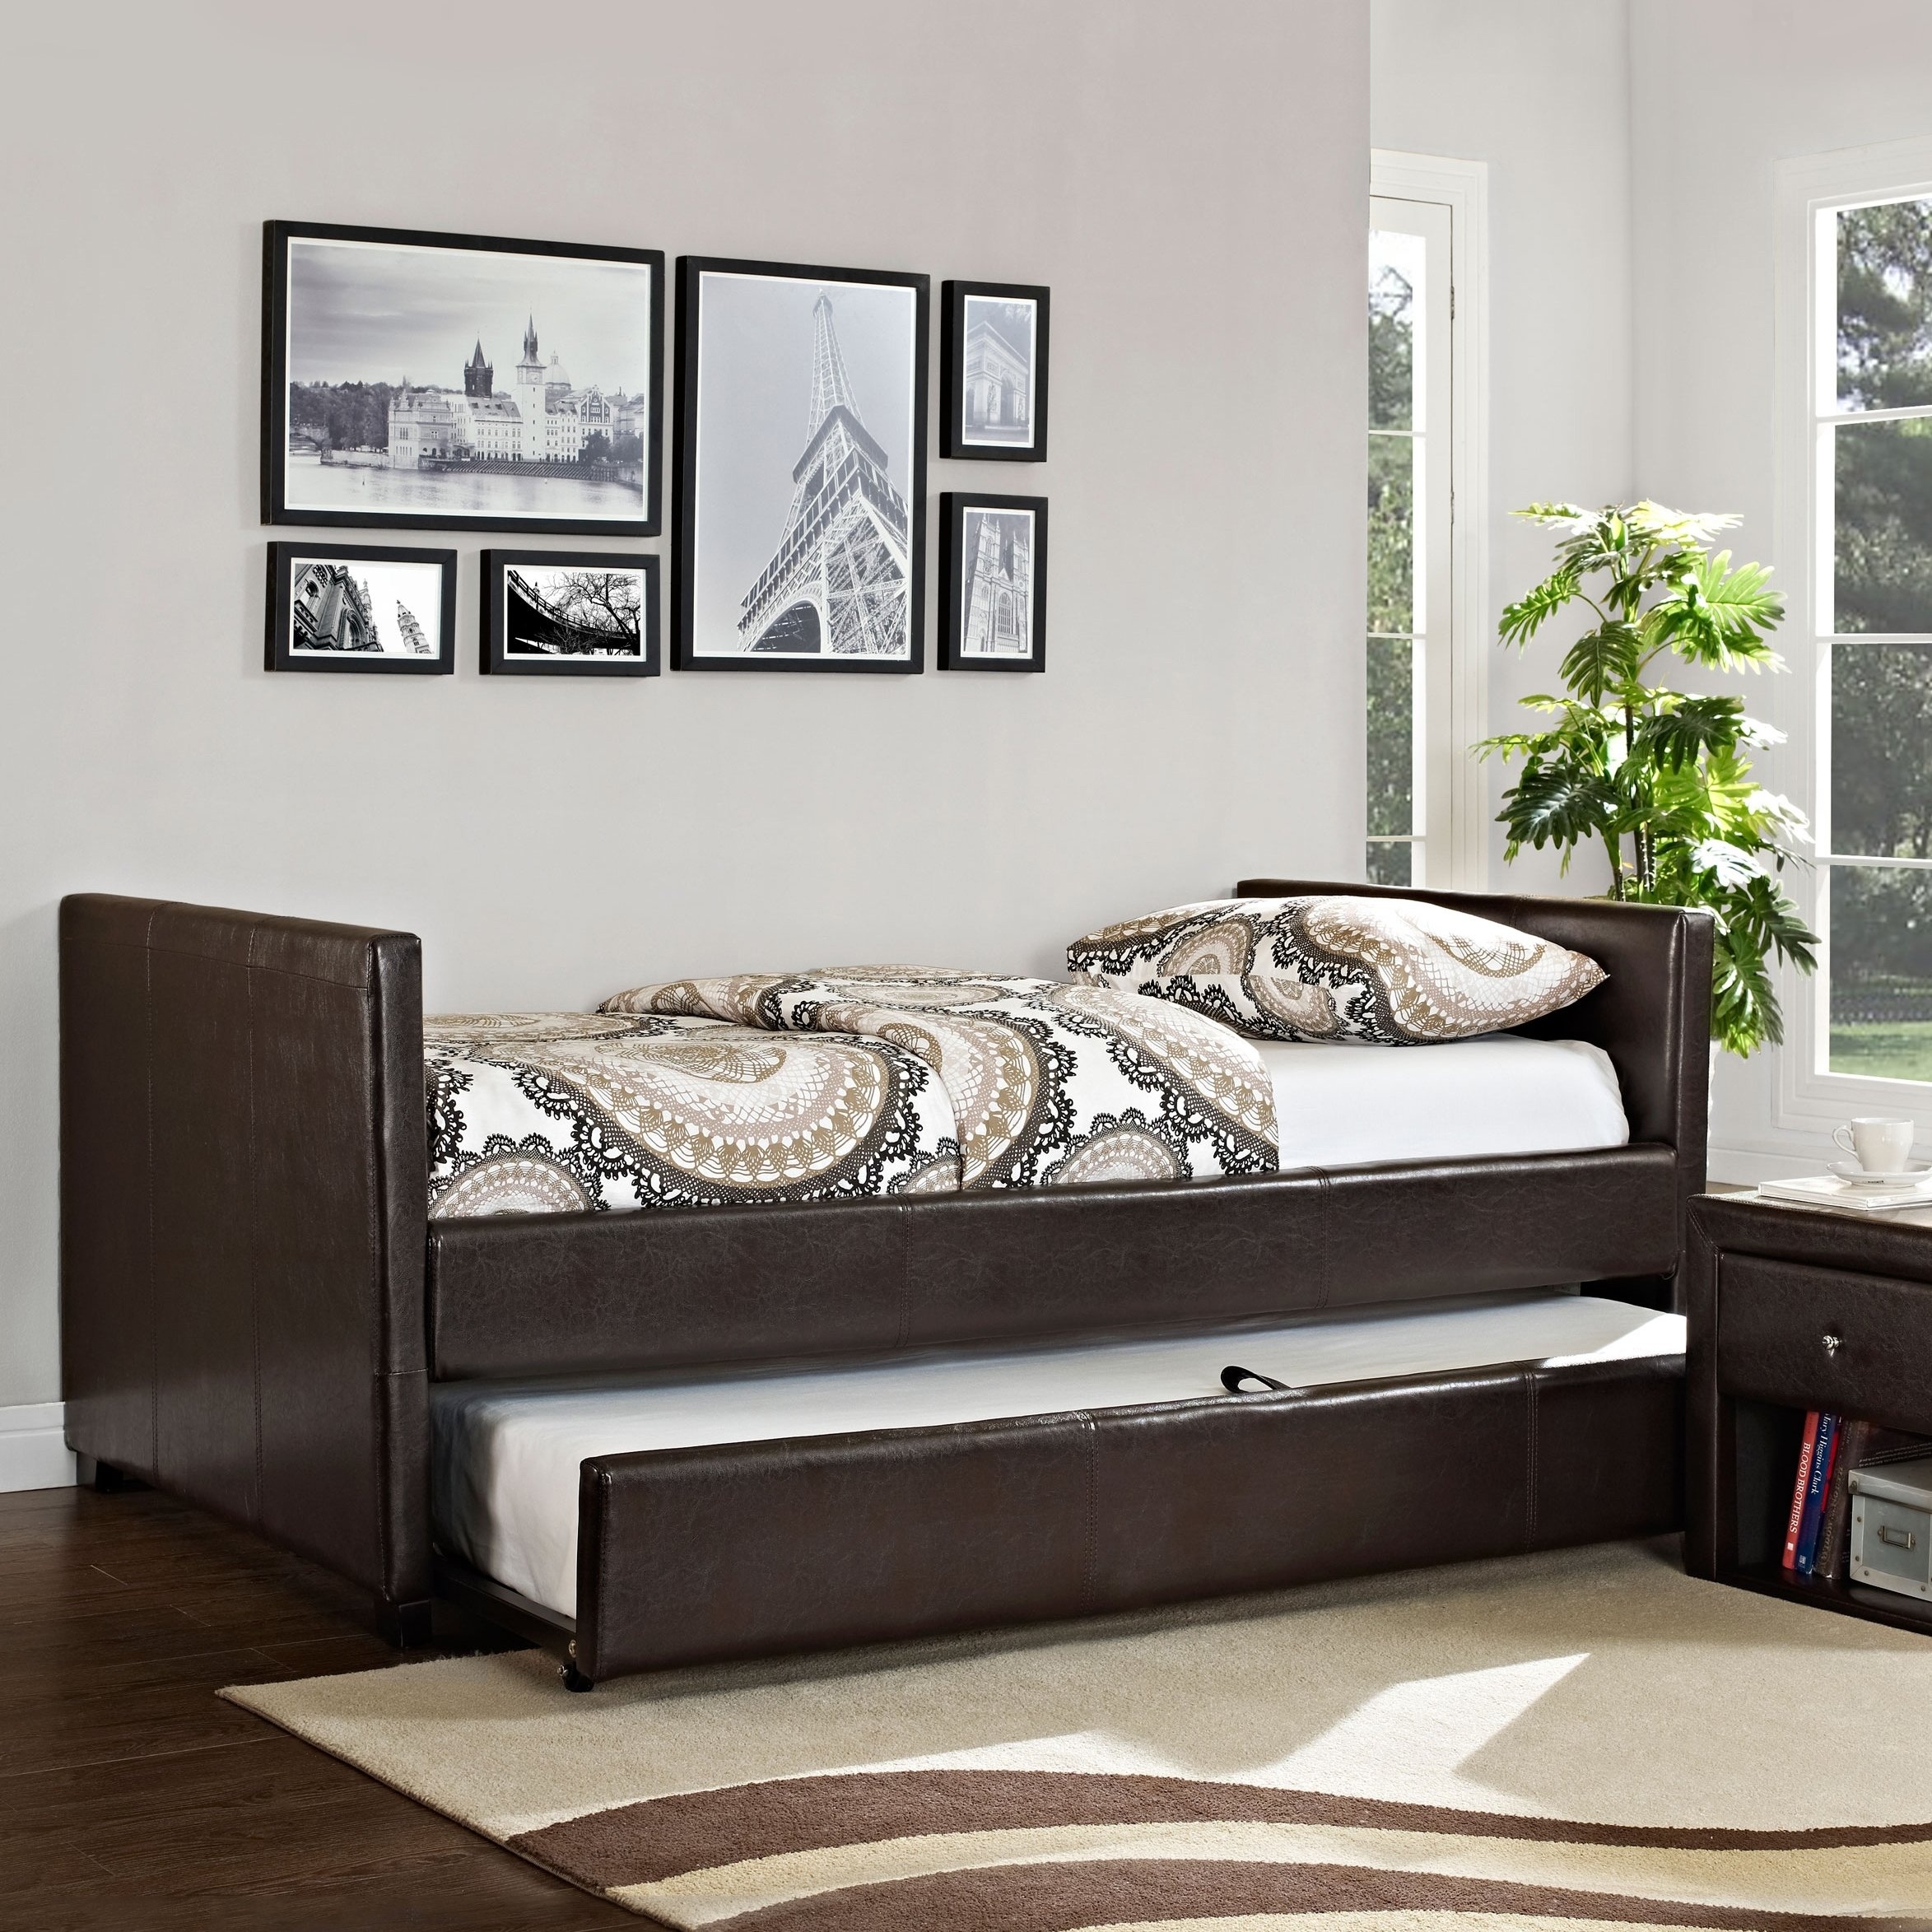 Metro faux leather brown day bed trundle